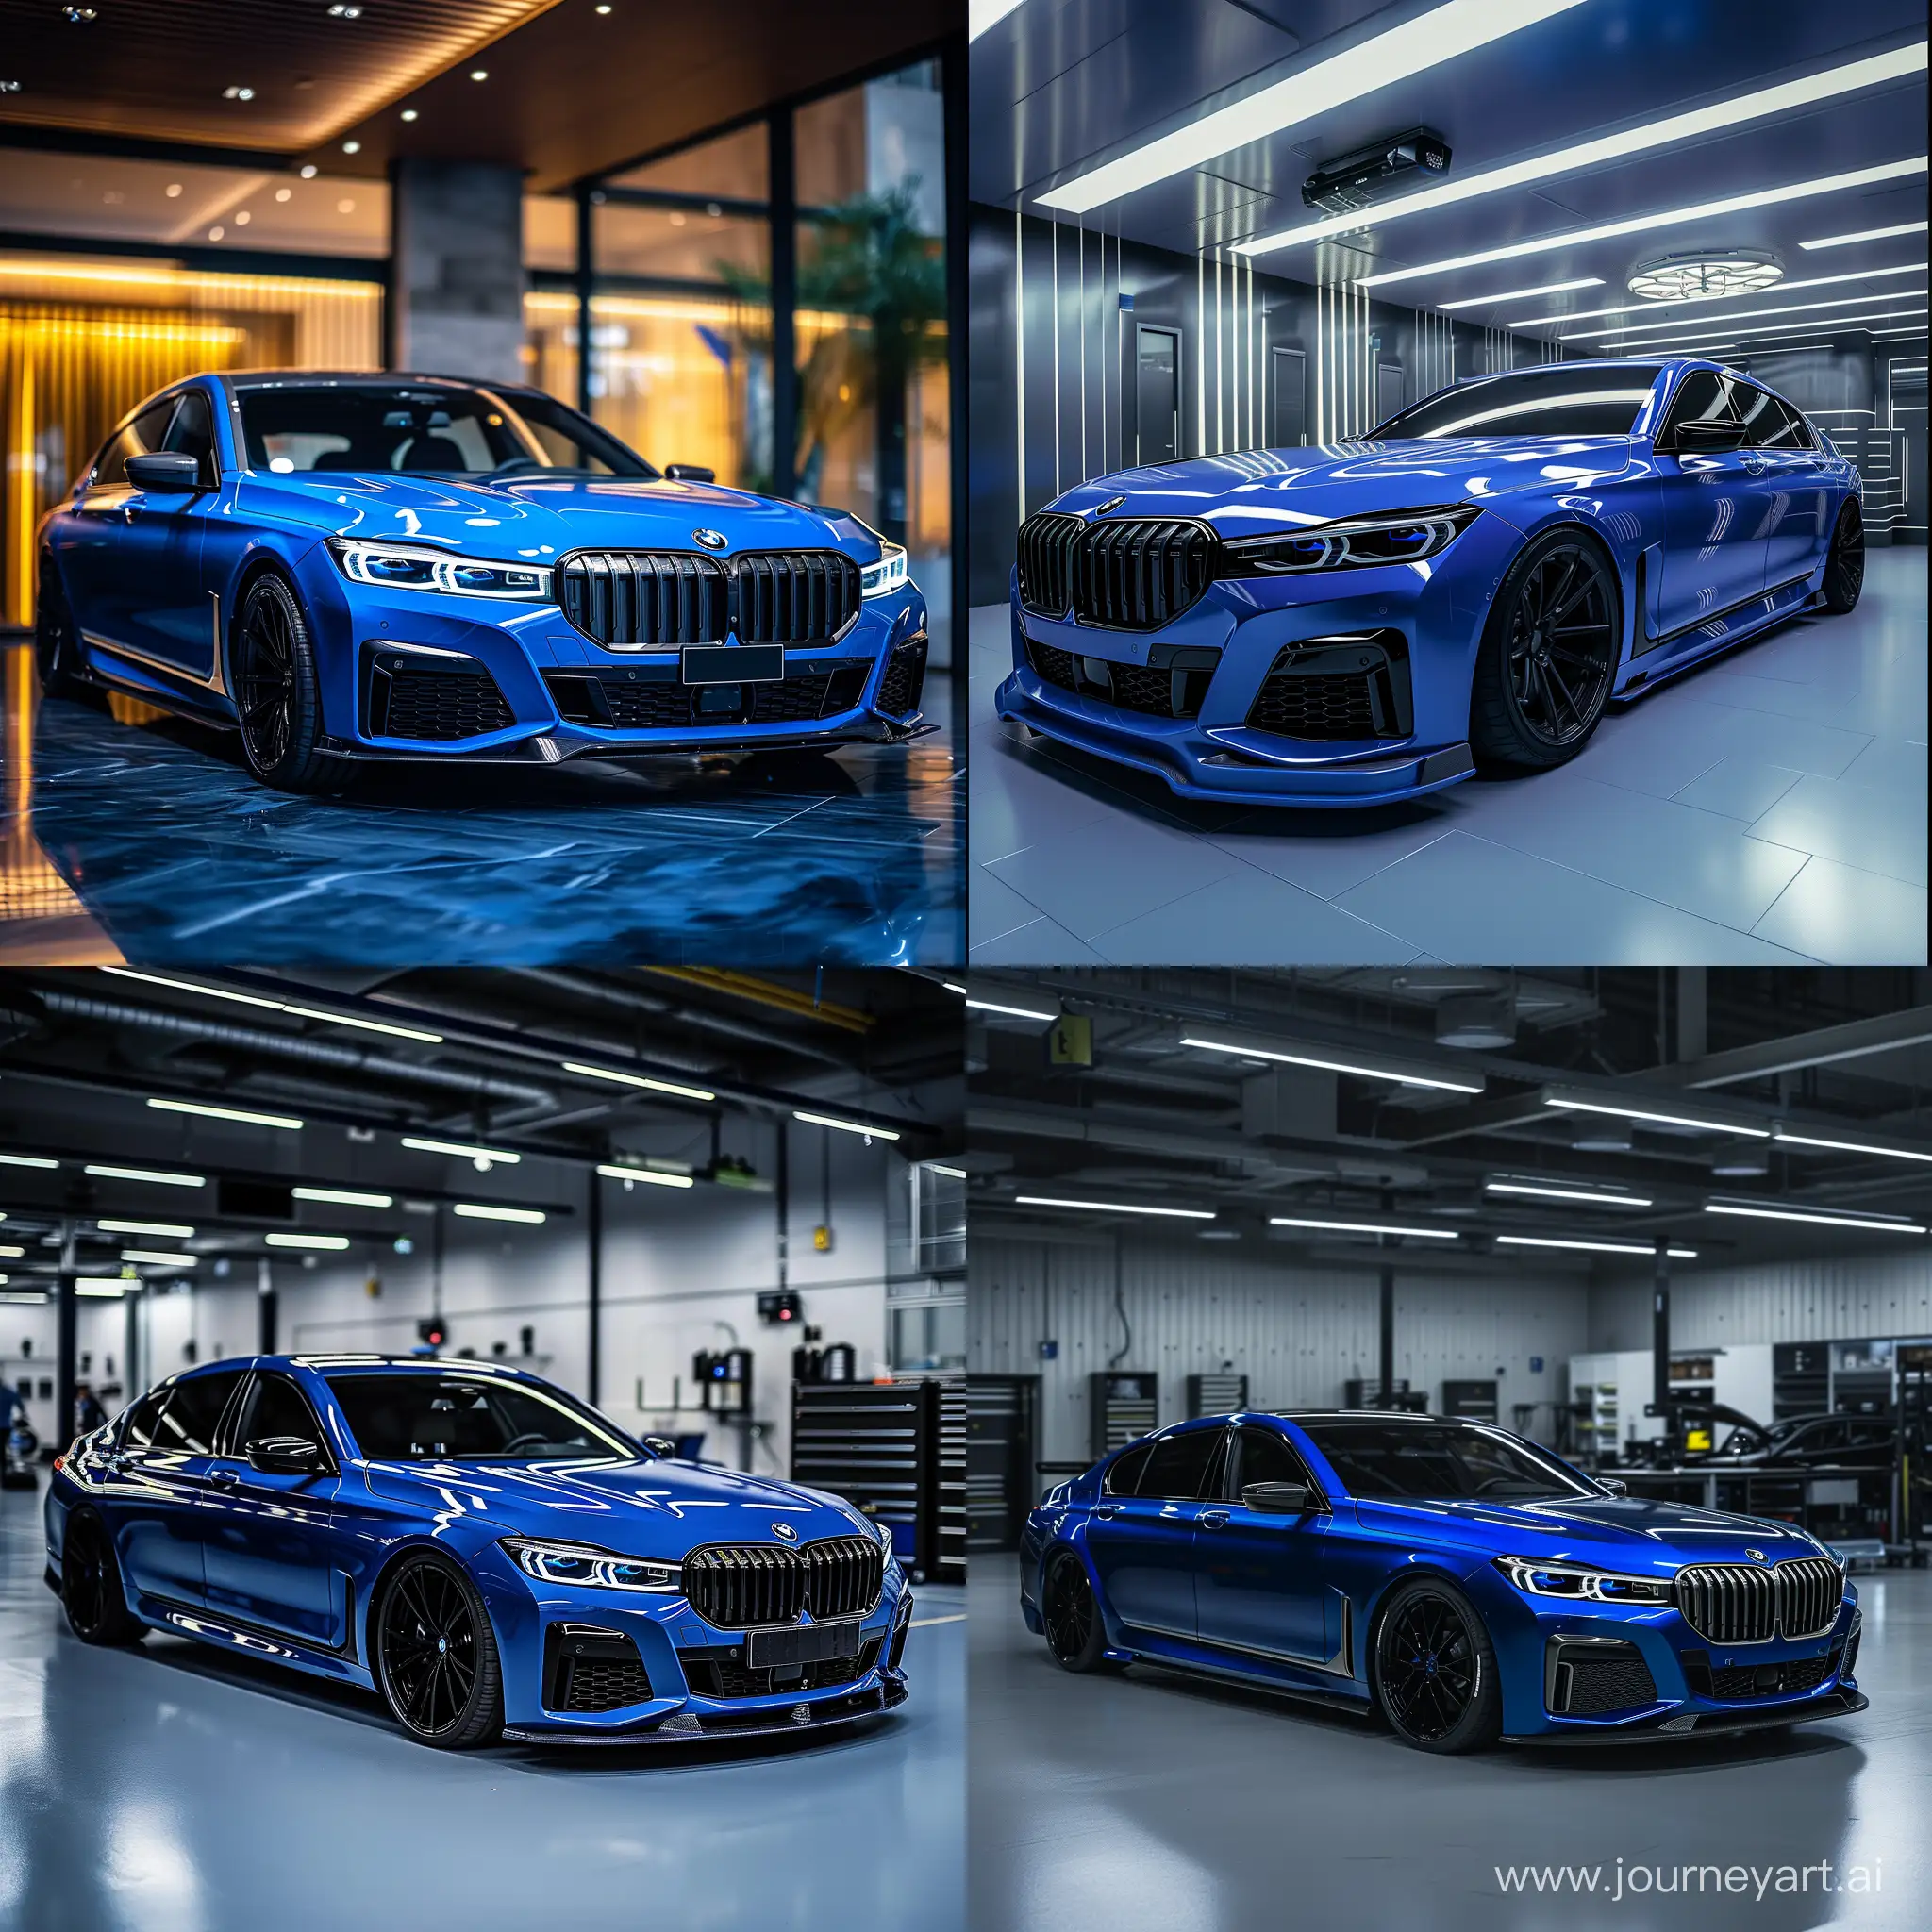 Luxurious-Blue-BMW-Serie-7-2023-with-Tuning-Body-Kit-in-HighEnd-Garage